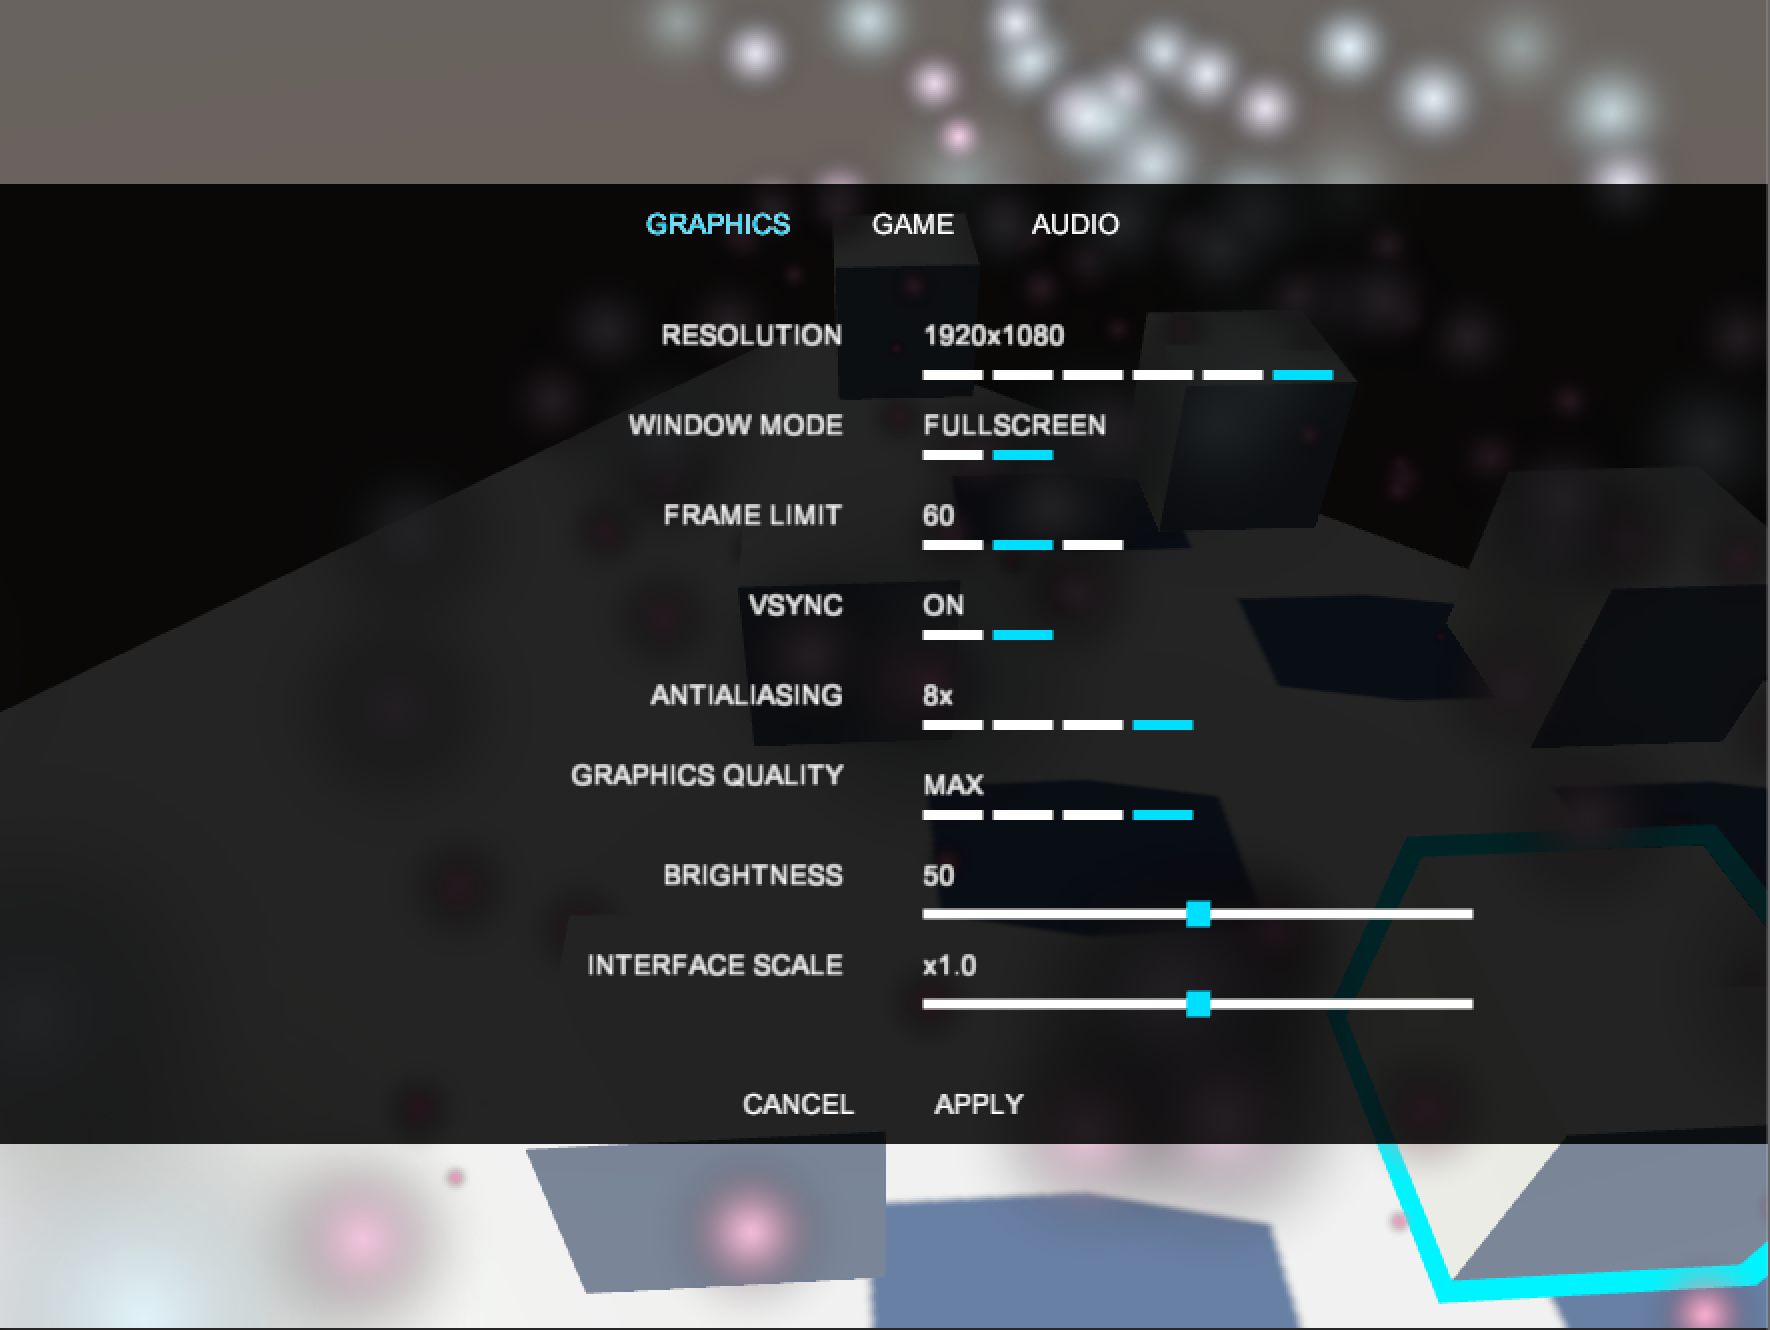 Any new/old-comers interested in this Settings menu? - Unity Forum